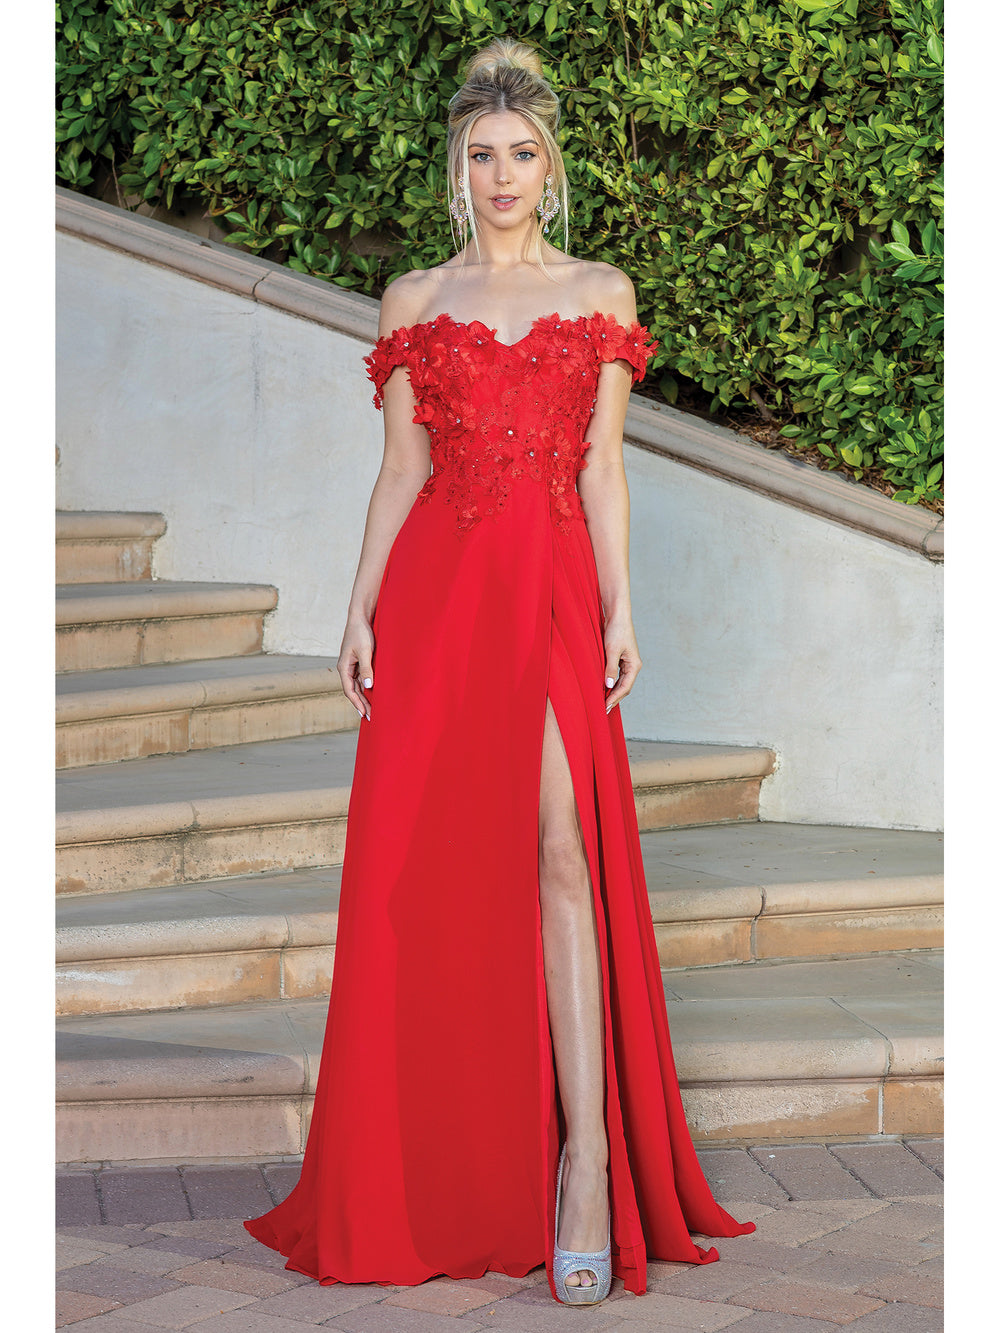 DQ 4268 Size 16 Red Long Off the Shoulder Maxi Slit Formal Prom Dress Corset Gown Floral embellished Bodice  Available Sizes: 16  Available Color: Red